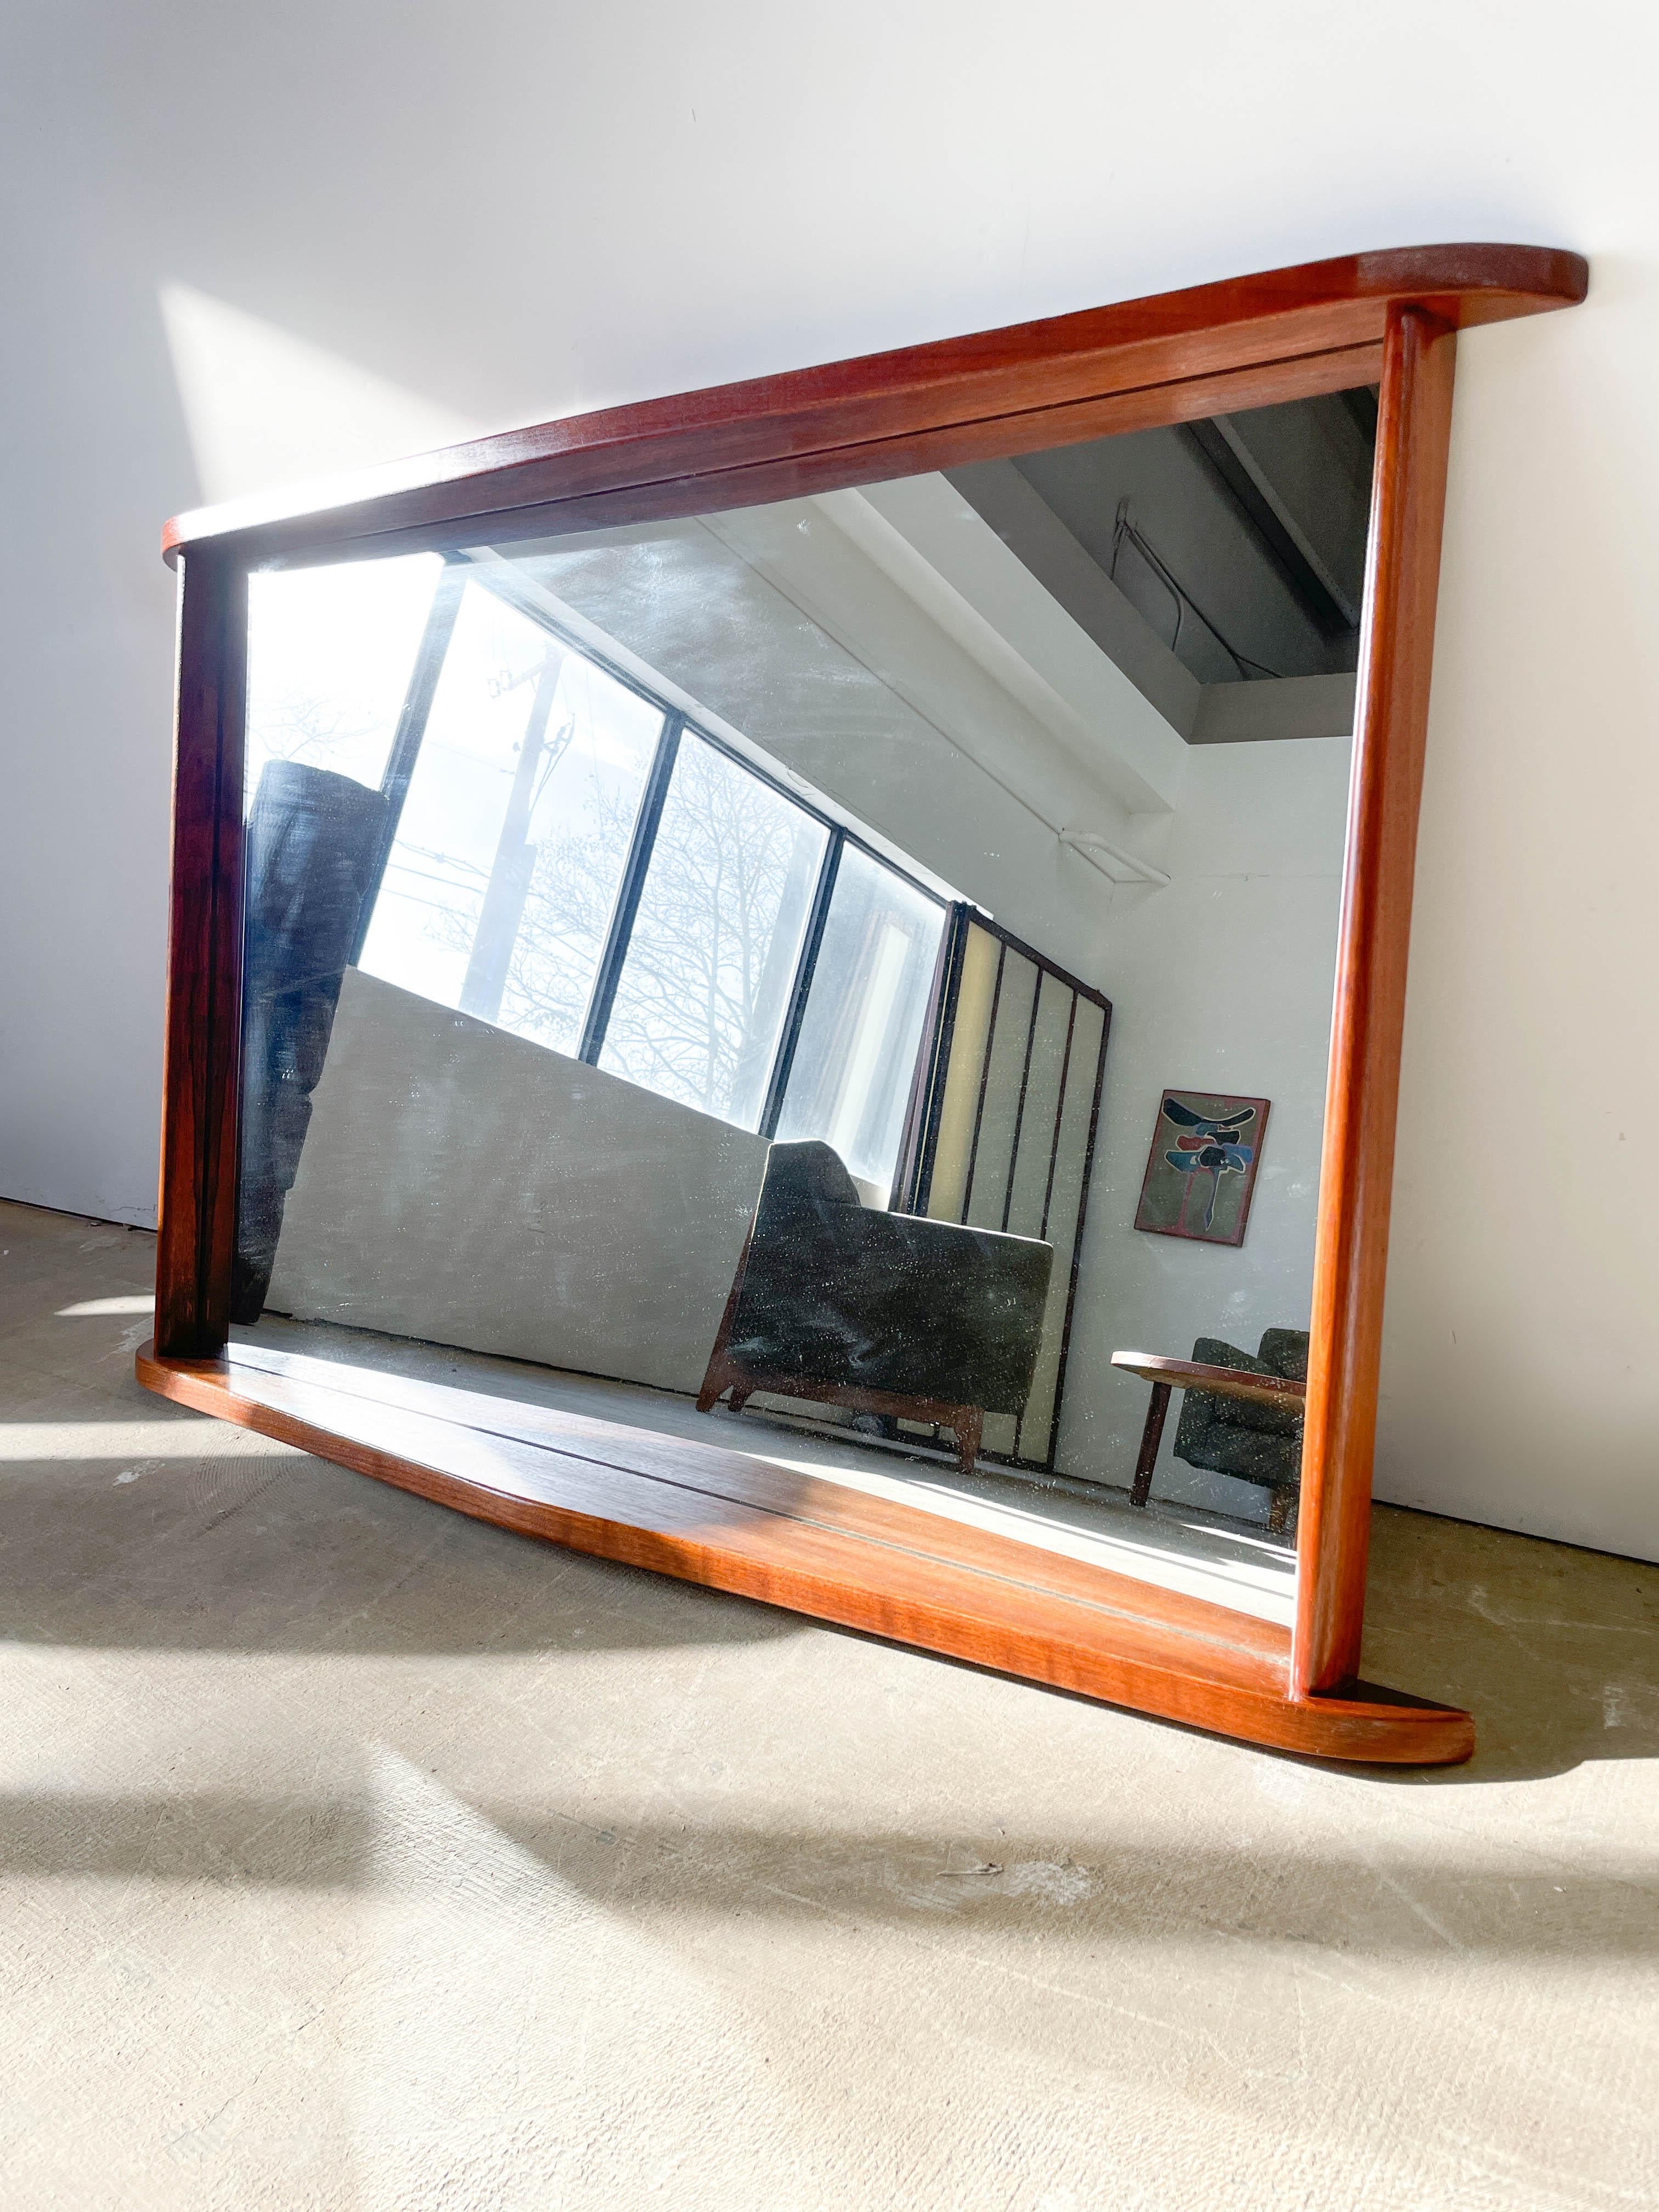 Stunning vintage sculpted walnut framed mirror attributed to George Nakashima for his Origins collection for Widdicomb-Mueller, 1958-1964. This mirror incorporates Nakashima’s distinctive organic modern forms on the upper and lower edges and his